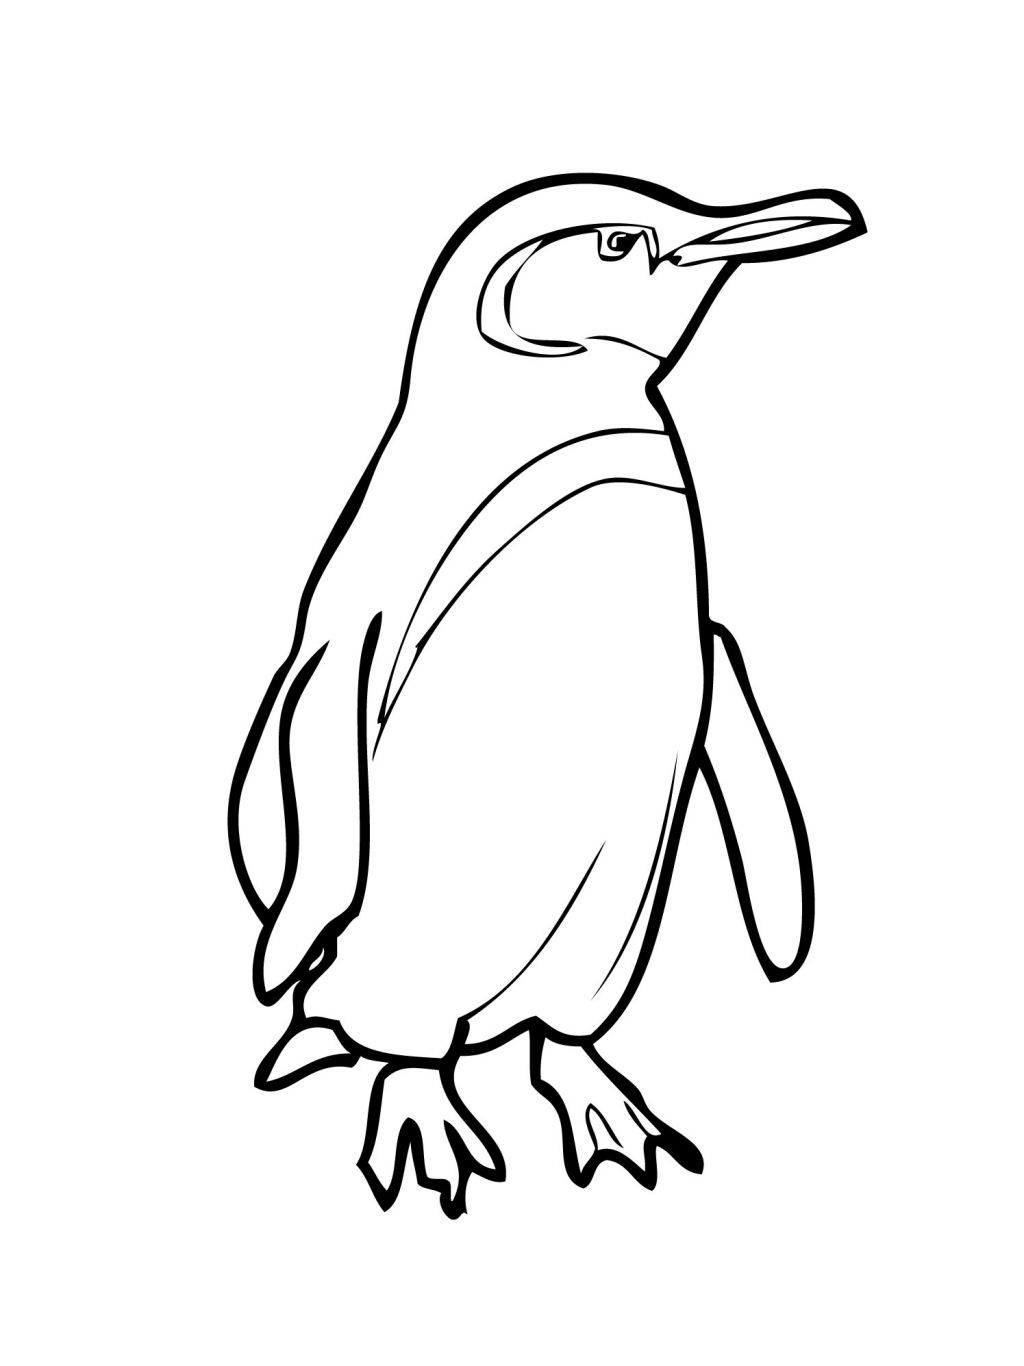 Cartoon penguin coloring pages - Coloring Pages & Pictures - IMAGIXS